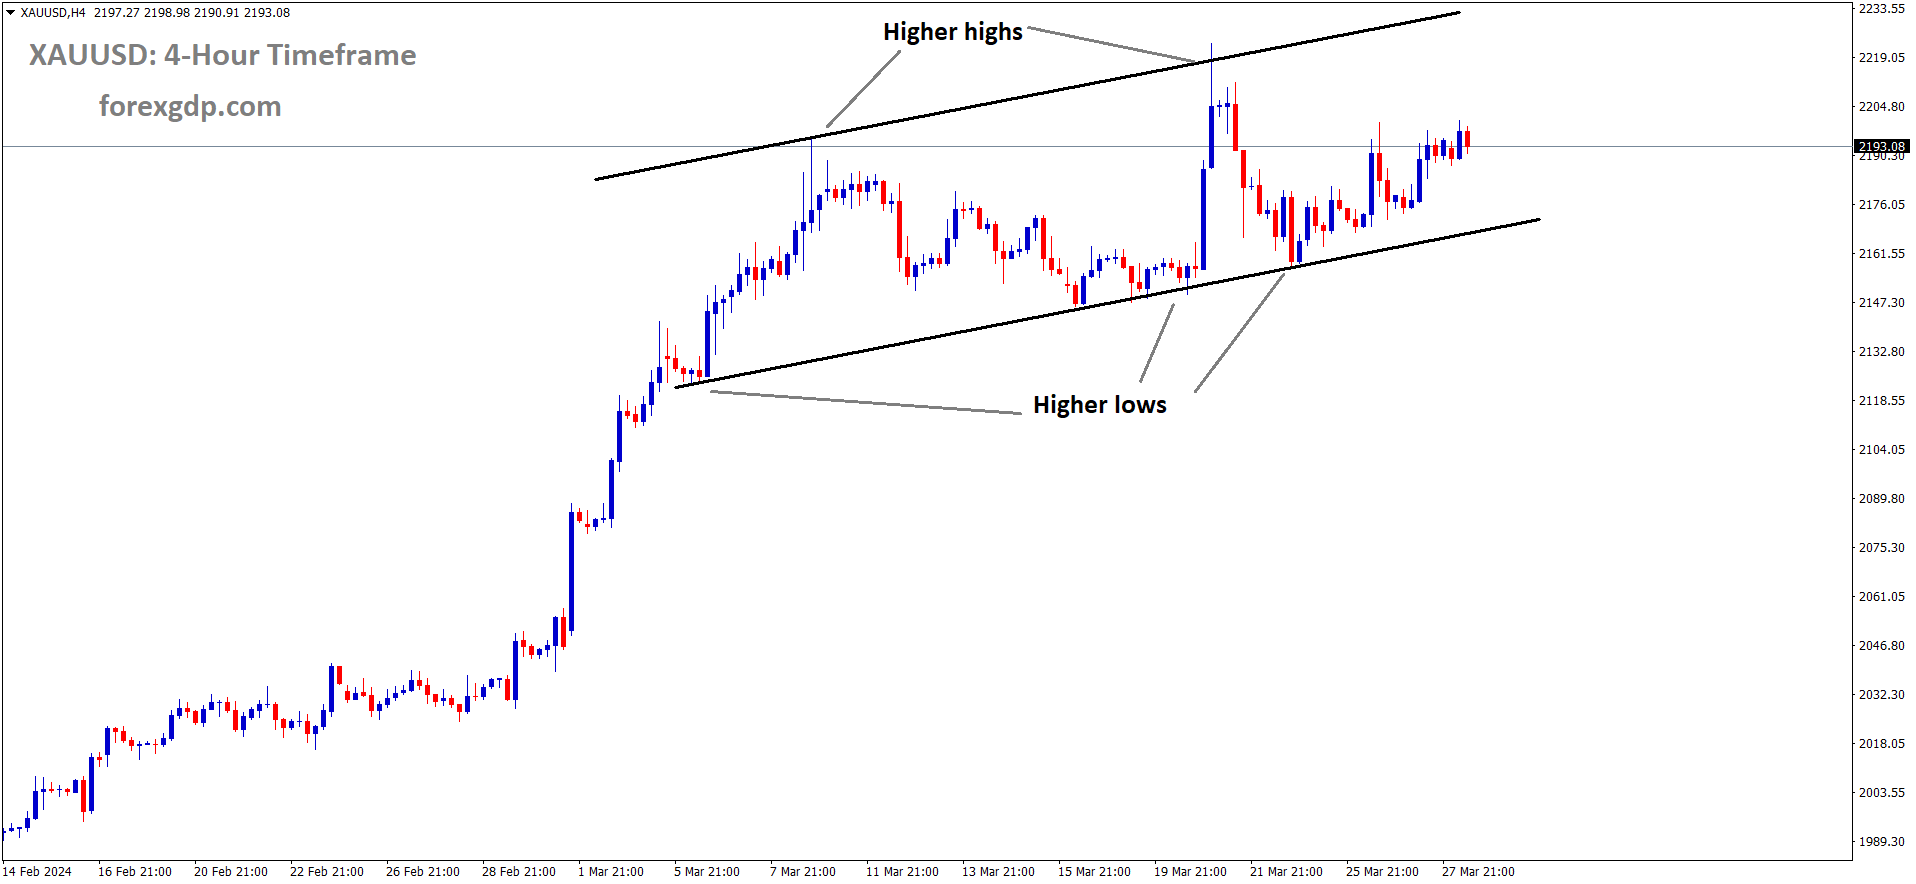 XAUUSD Gold price is moving in an Ascending channel and the market has rebounded from the higher low area of the channel